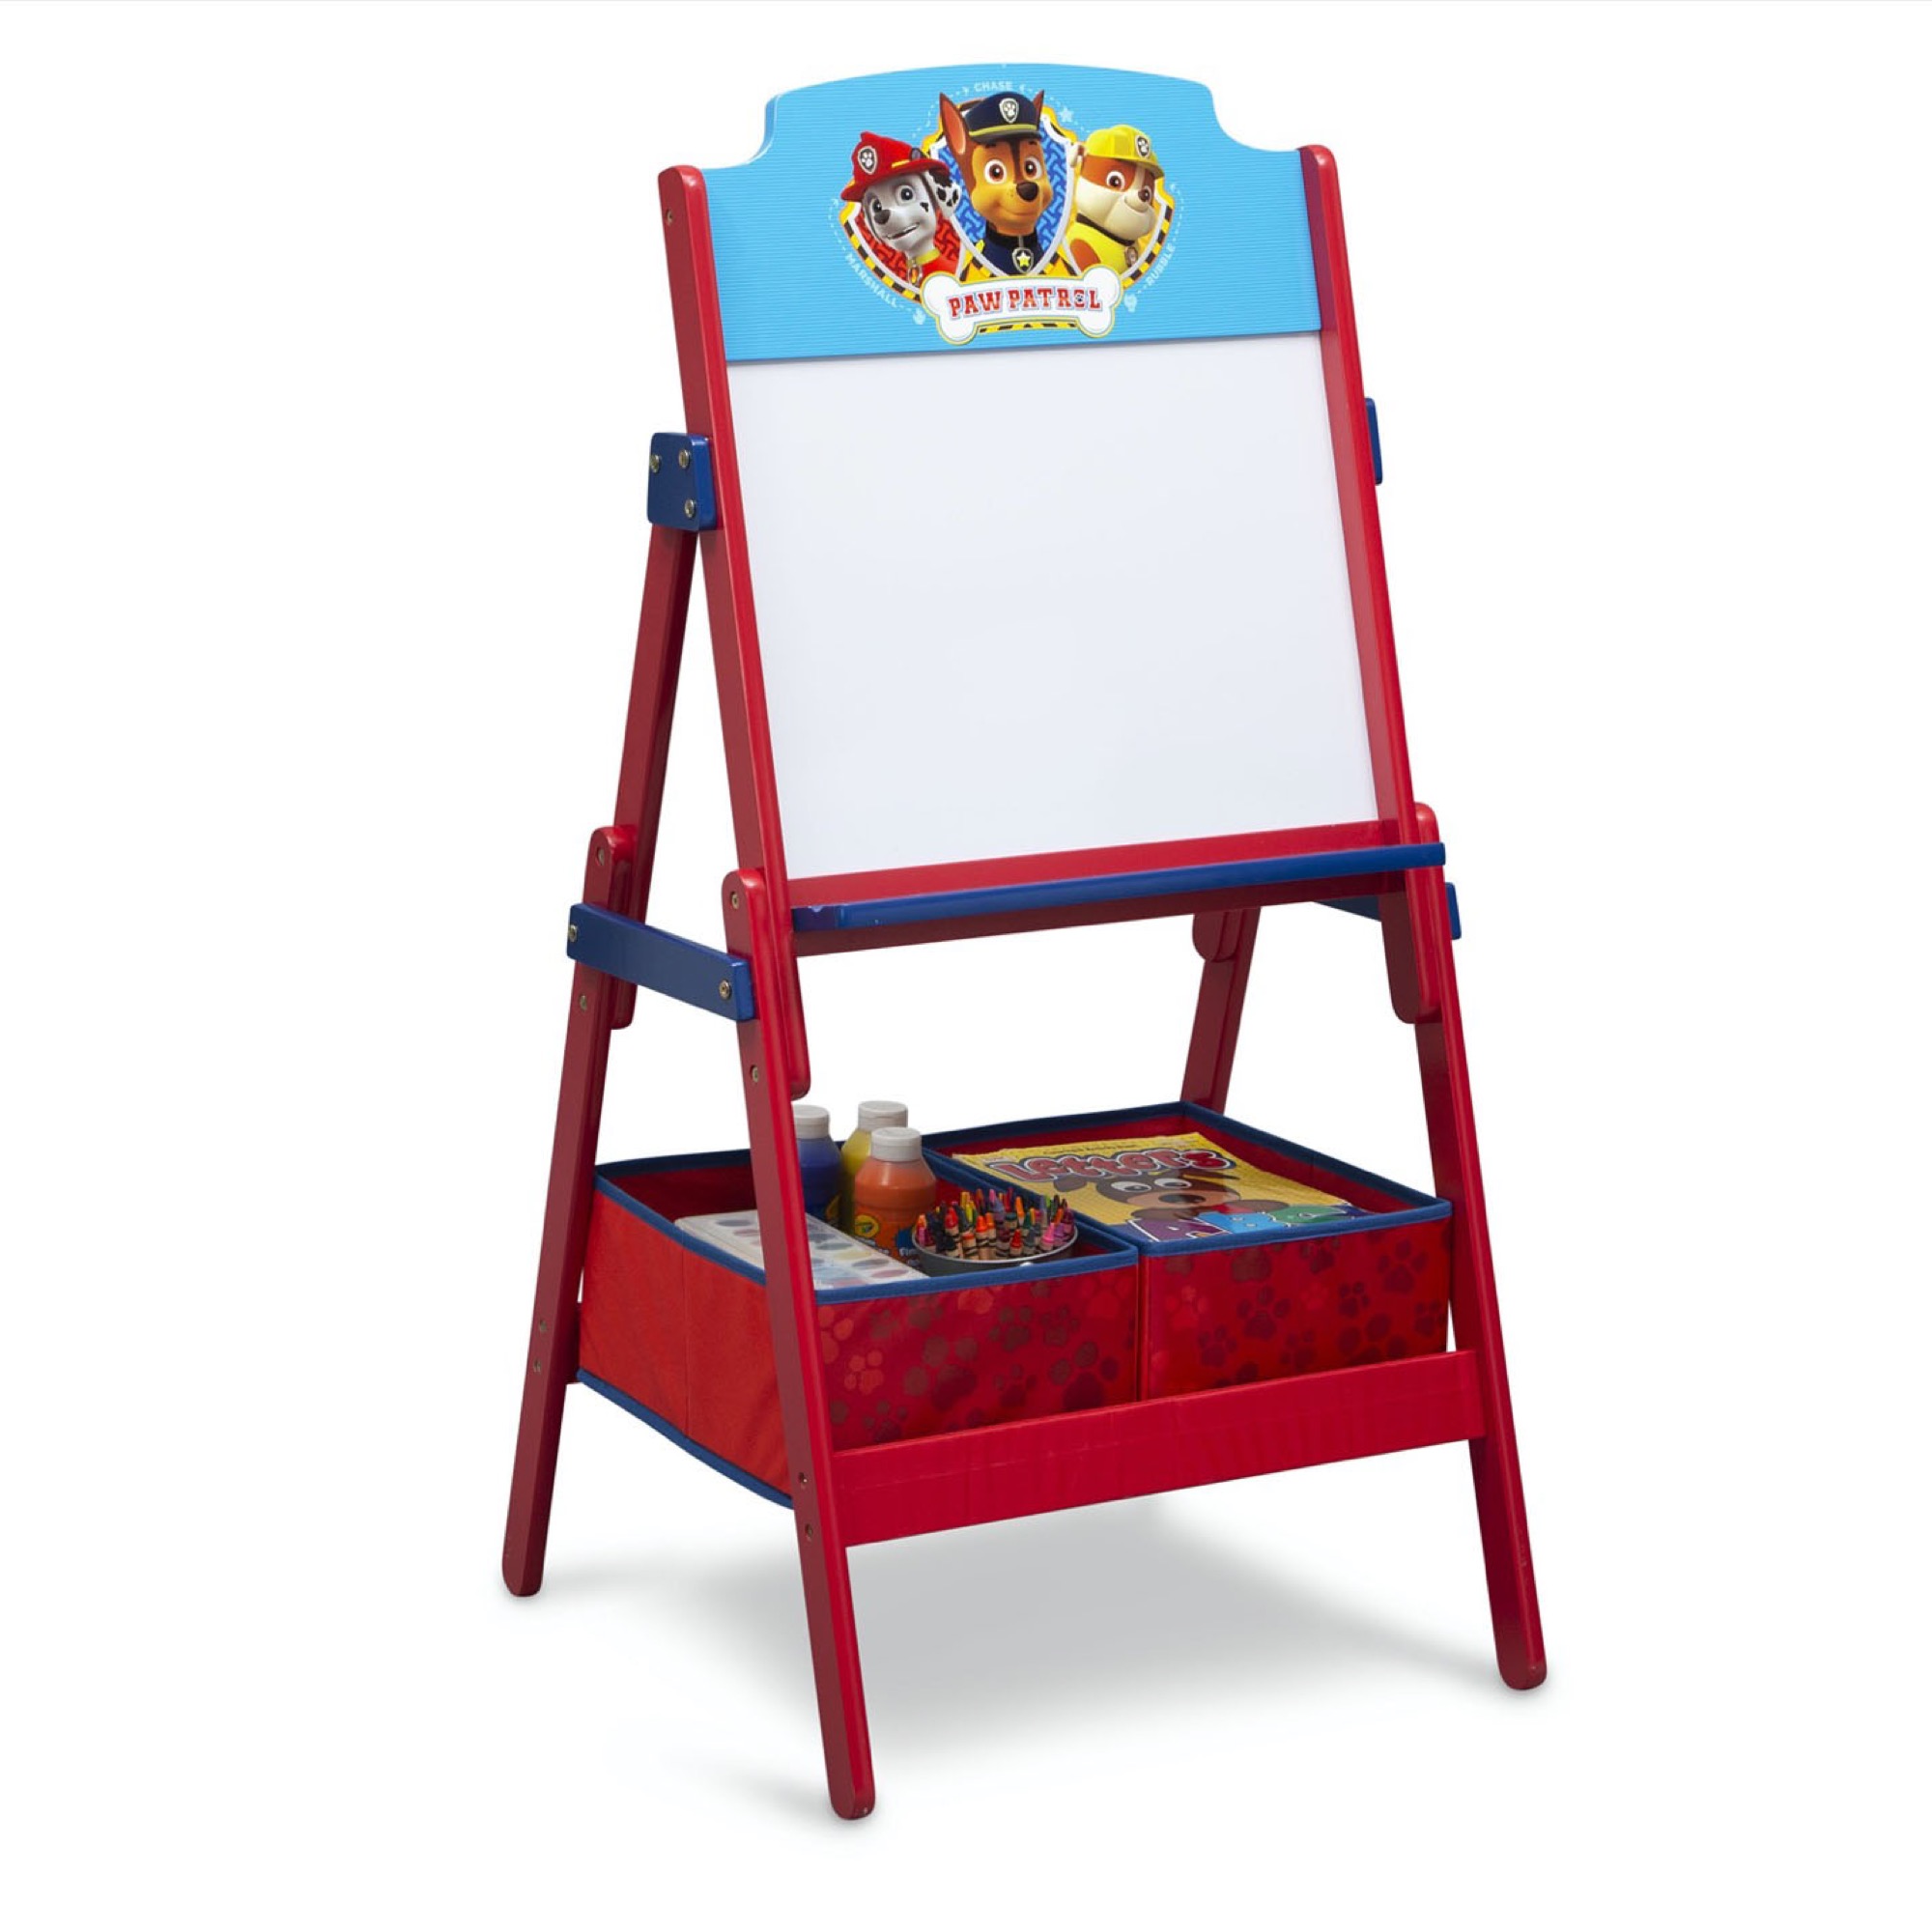 Nick Jr. PAW Patrol Activity Easel with Storage by Delta Children, Greenguard Gold Certified - image 1 of 7